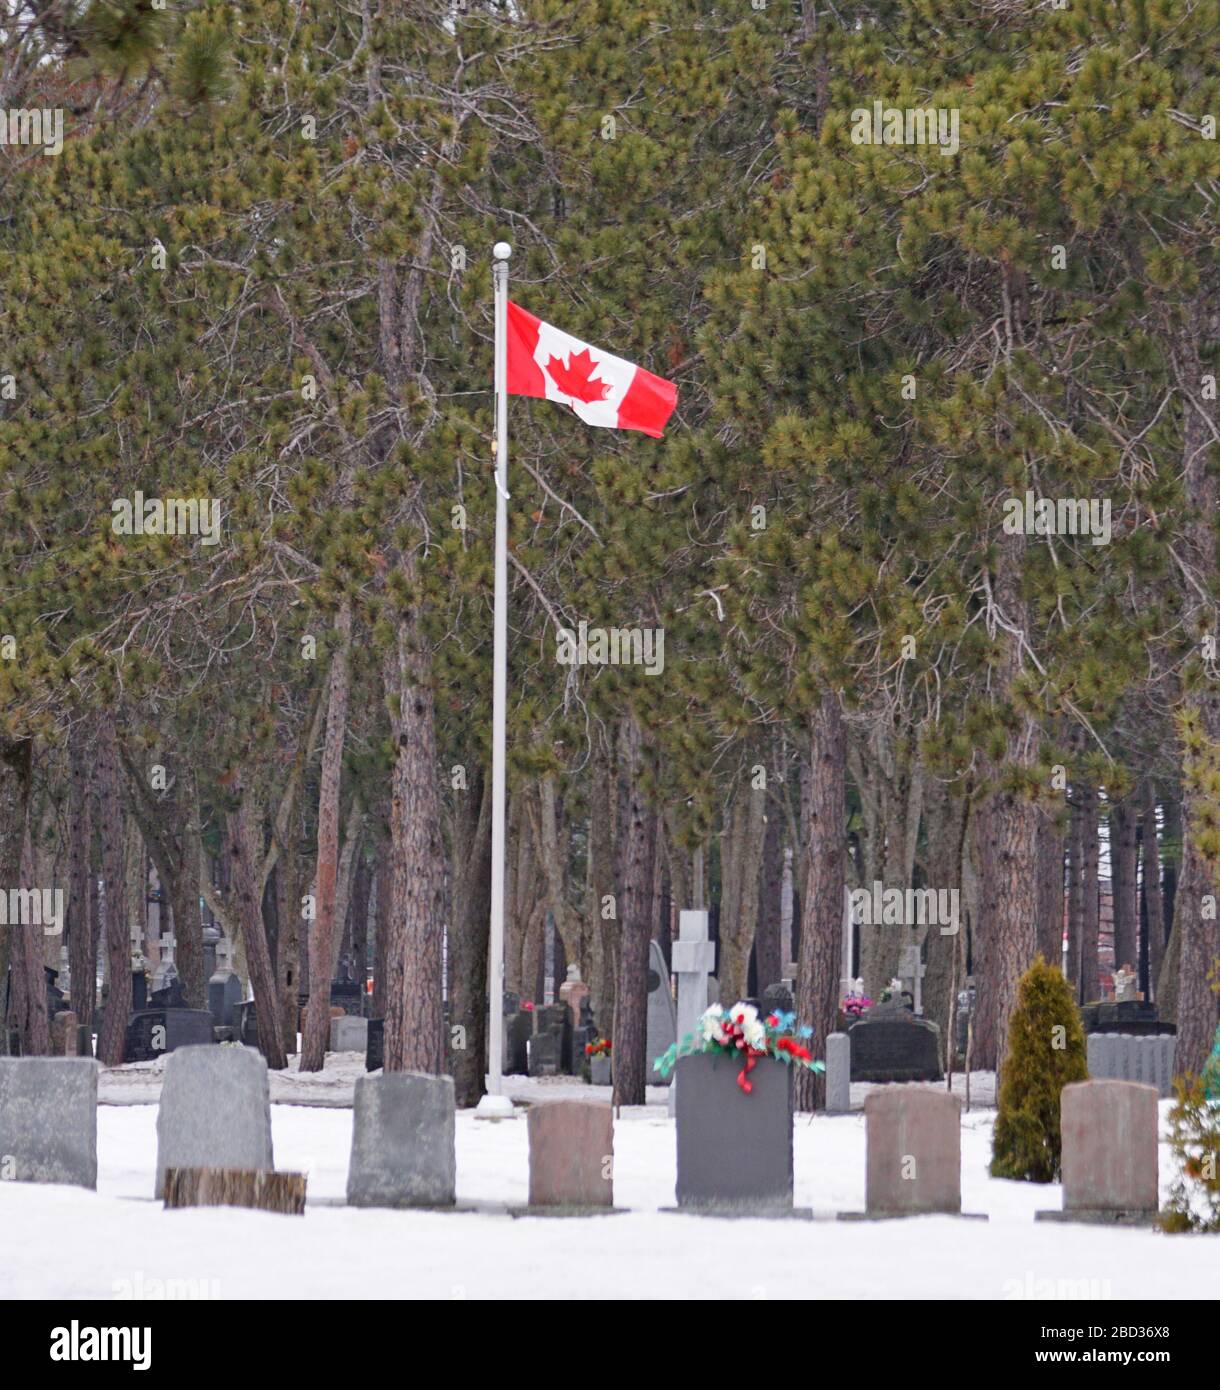 COVID victims in Canada. A Canadian flag floating amongst tombstones in a cemetary Stock Photo